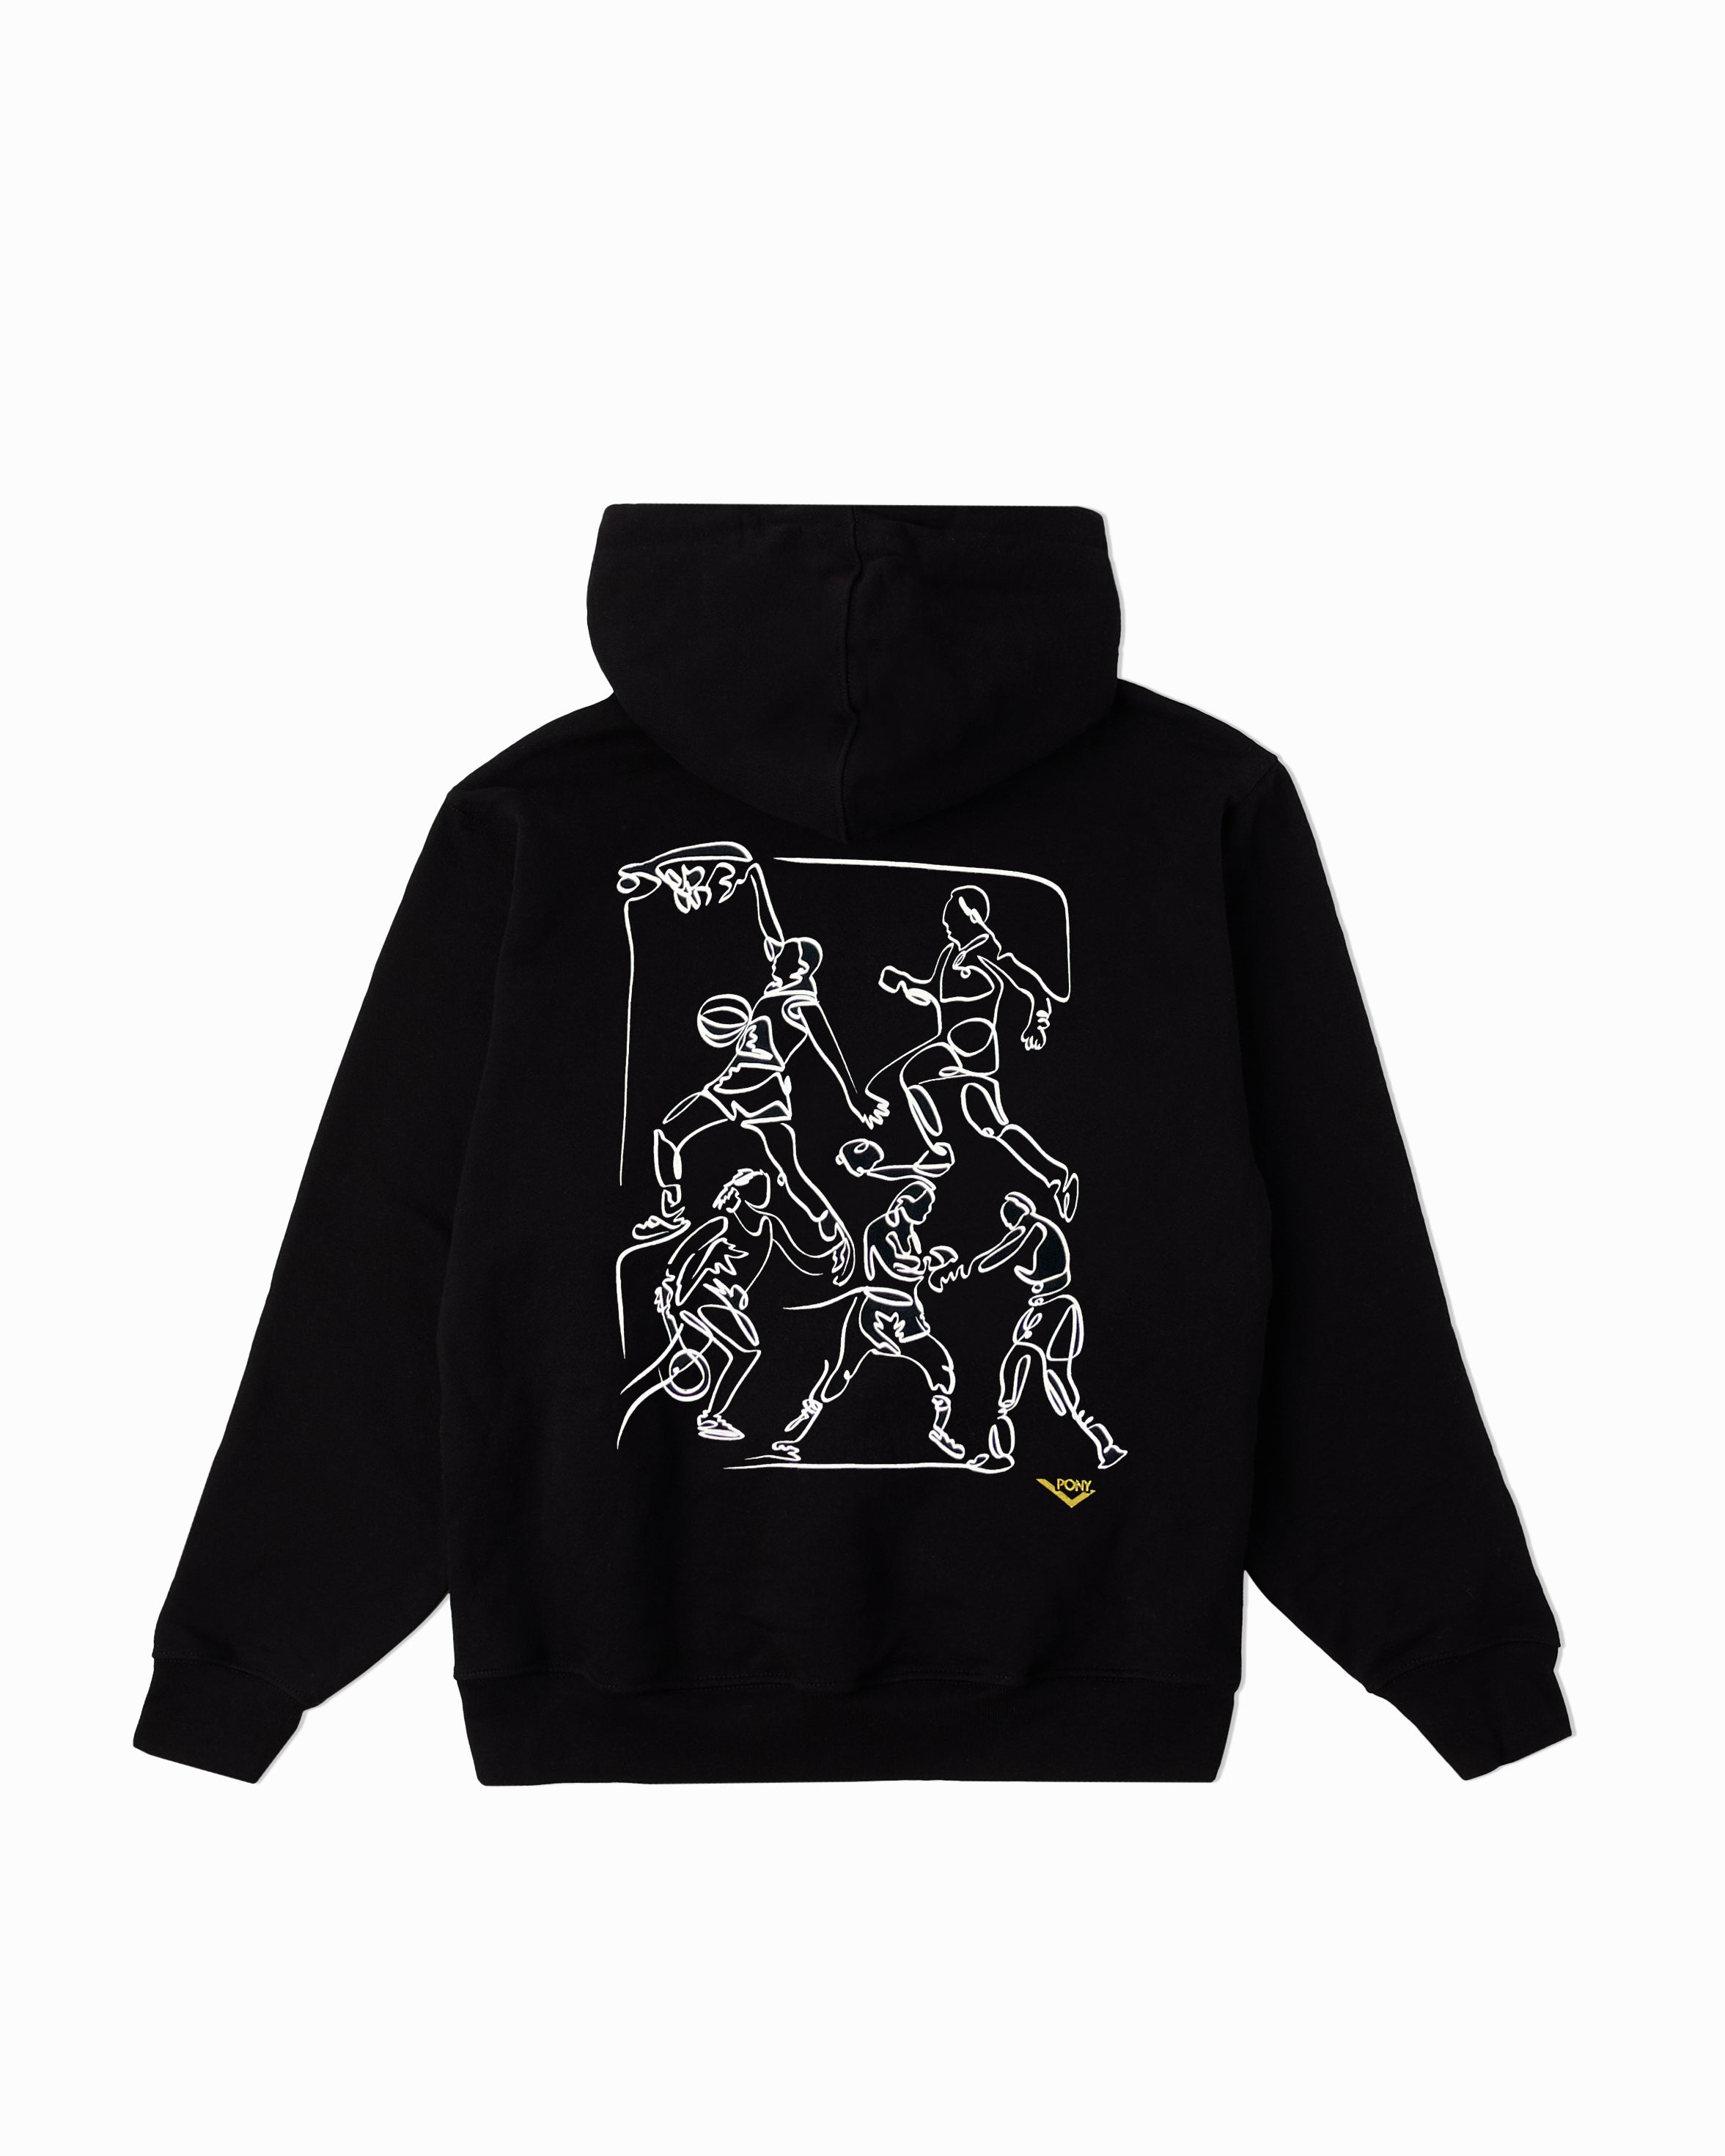 PONY Semicentennial Sports Hoodie back shot showing Line drawing illustration of basketball players dunking and running in a figurative style. Gold PONY lockup embroidered in the lower right of the design.